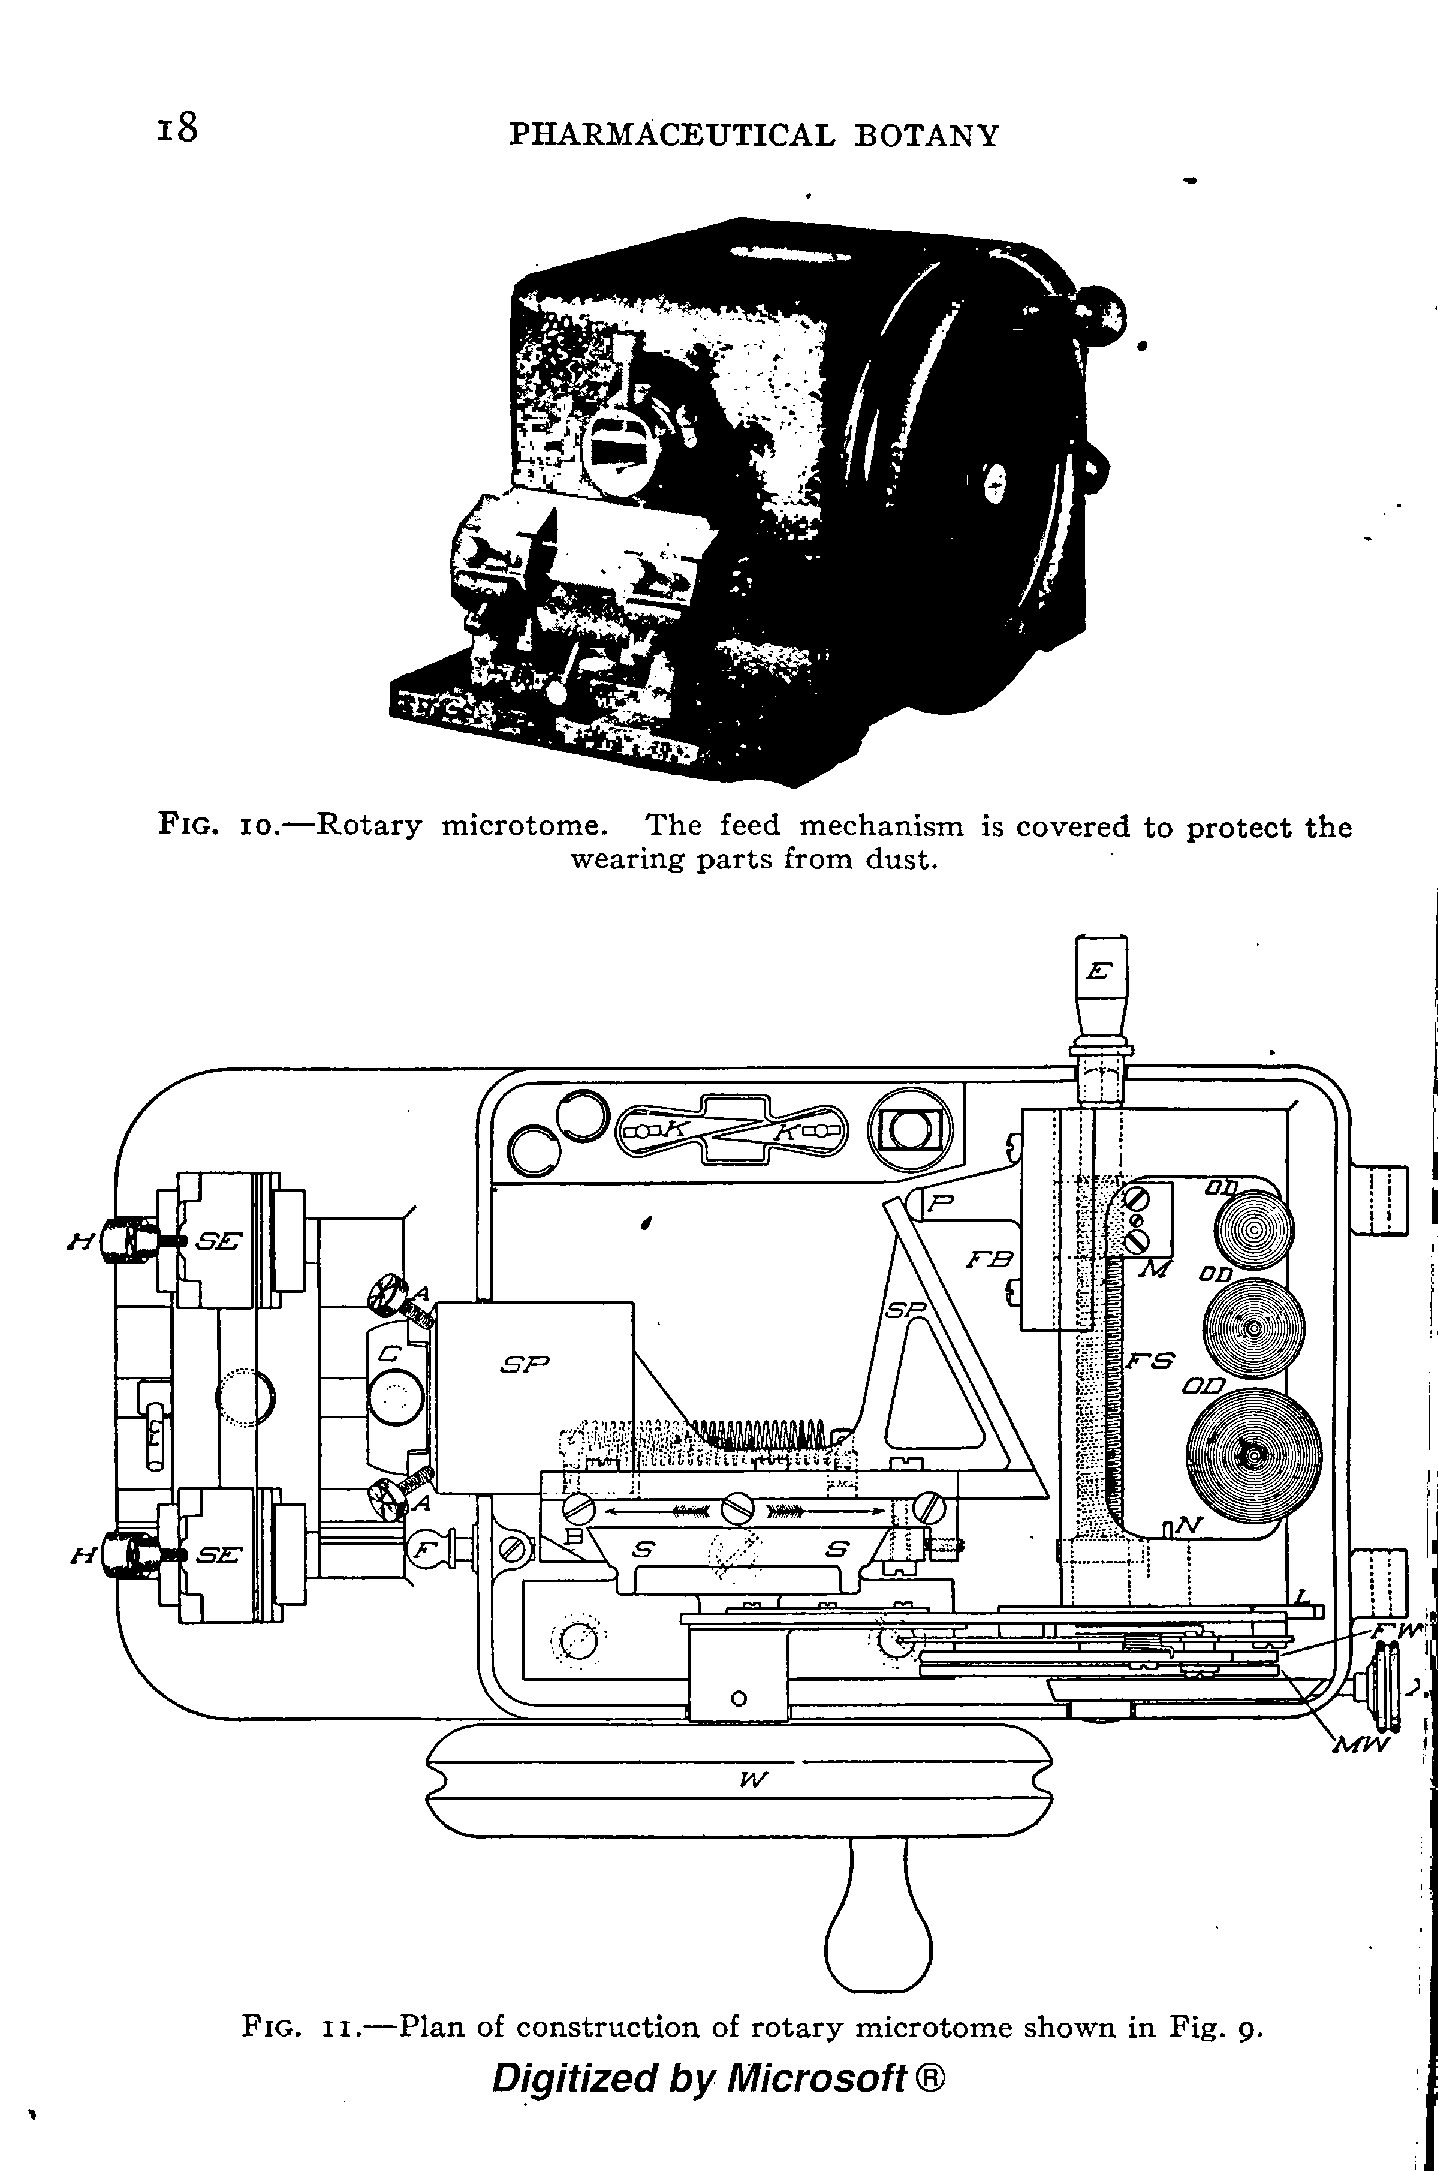 Fig. 10.—Rotary microtome. The feed mechanism is covered to protect the wearing parts from dust.